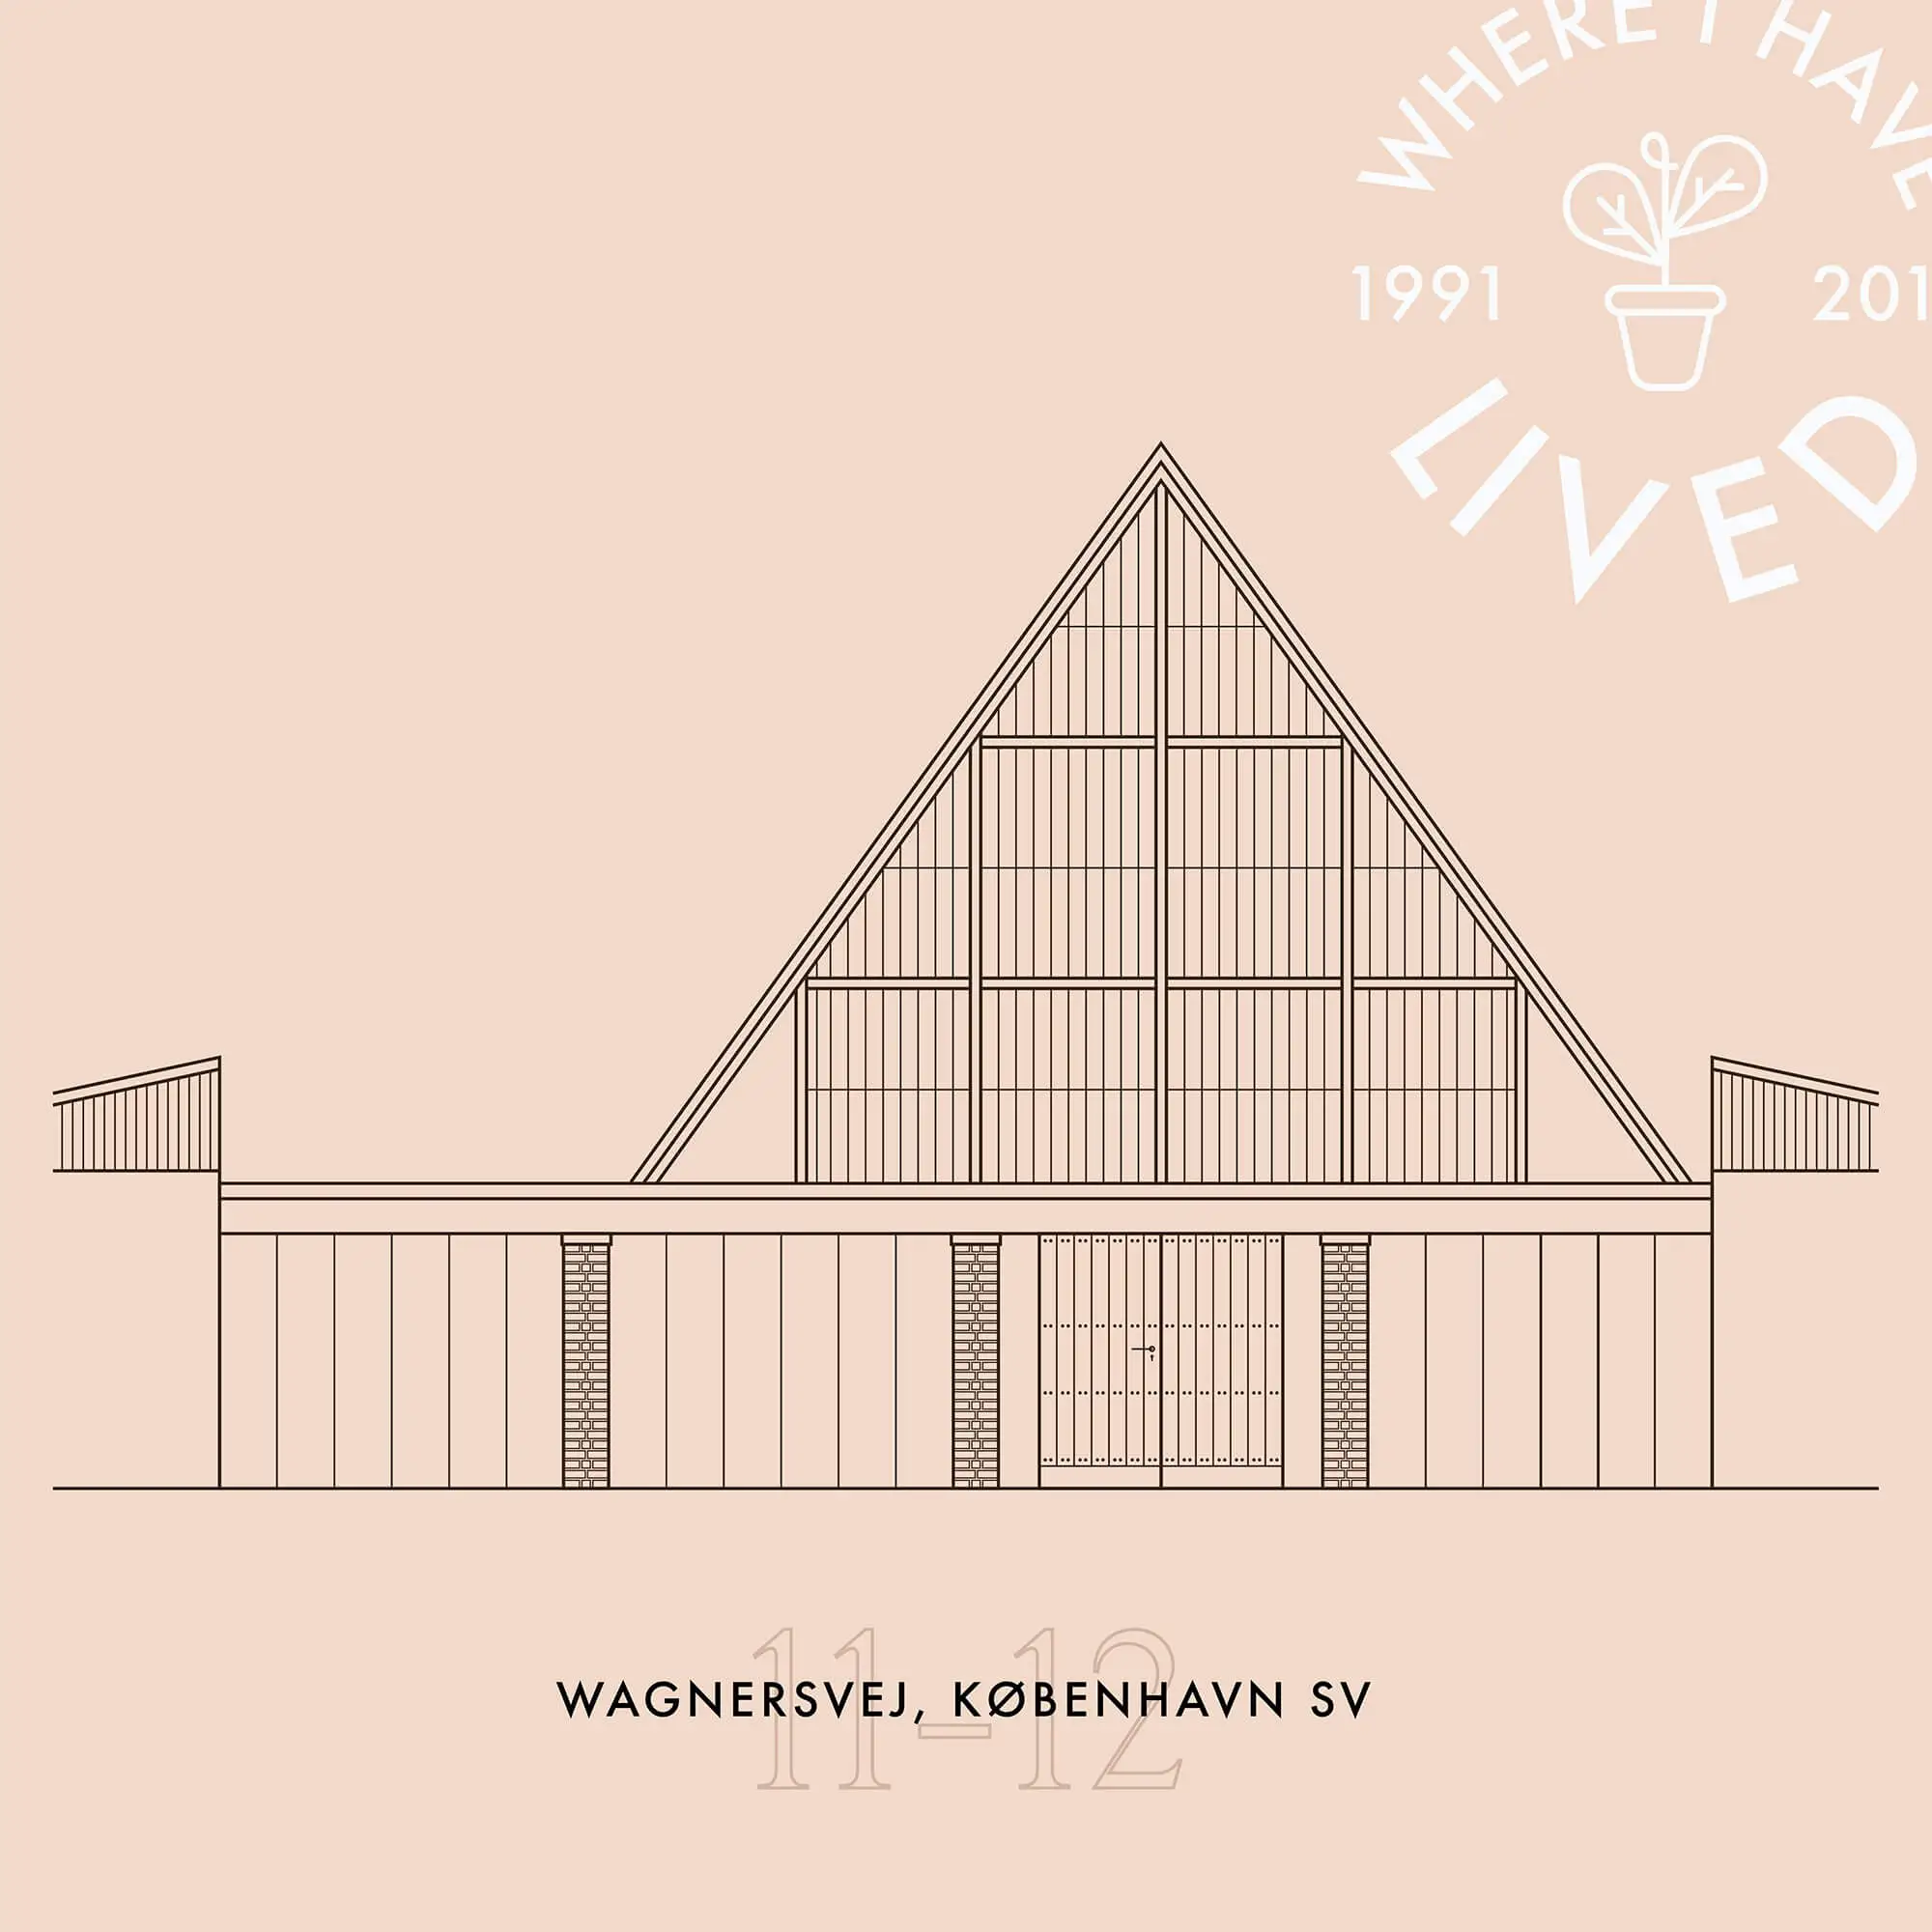 Vector image of an old church turned into a scout center